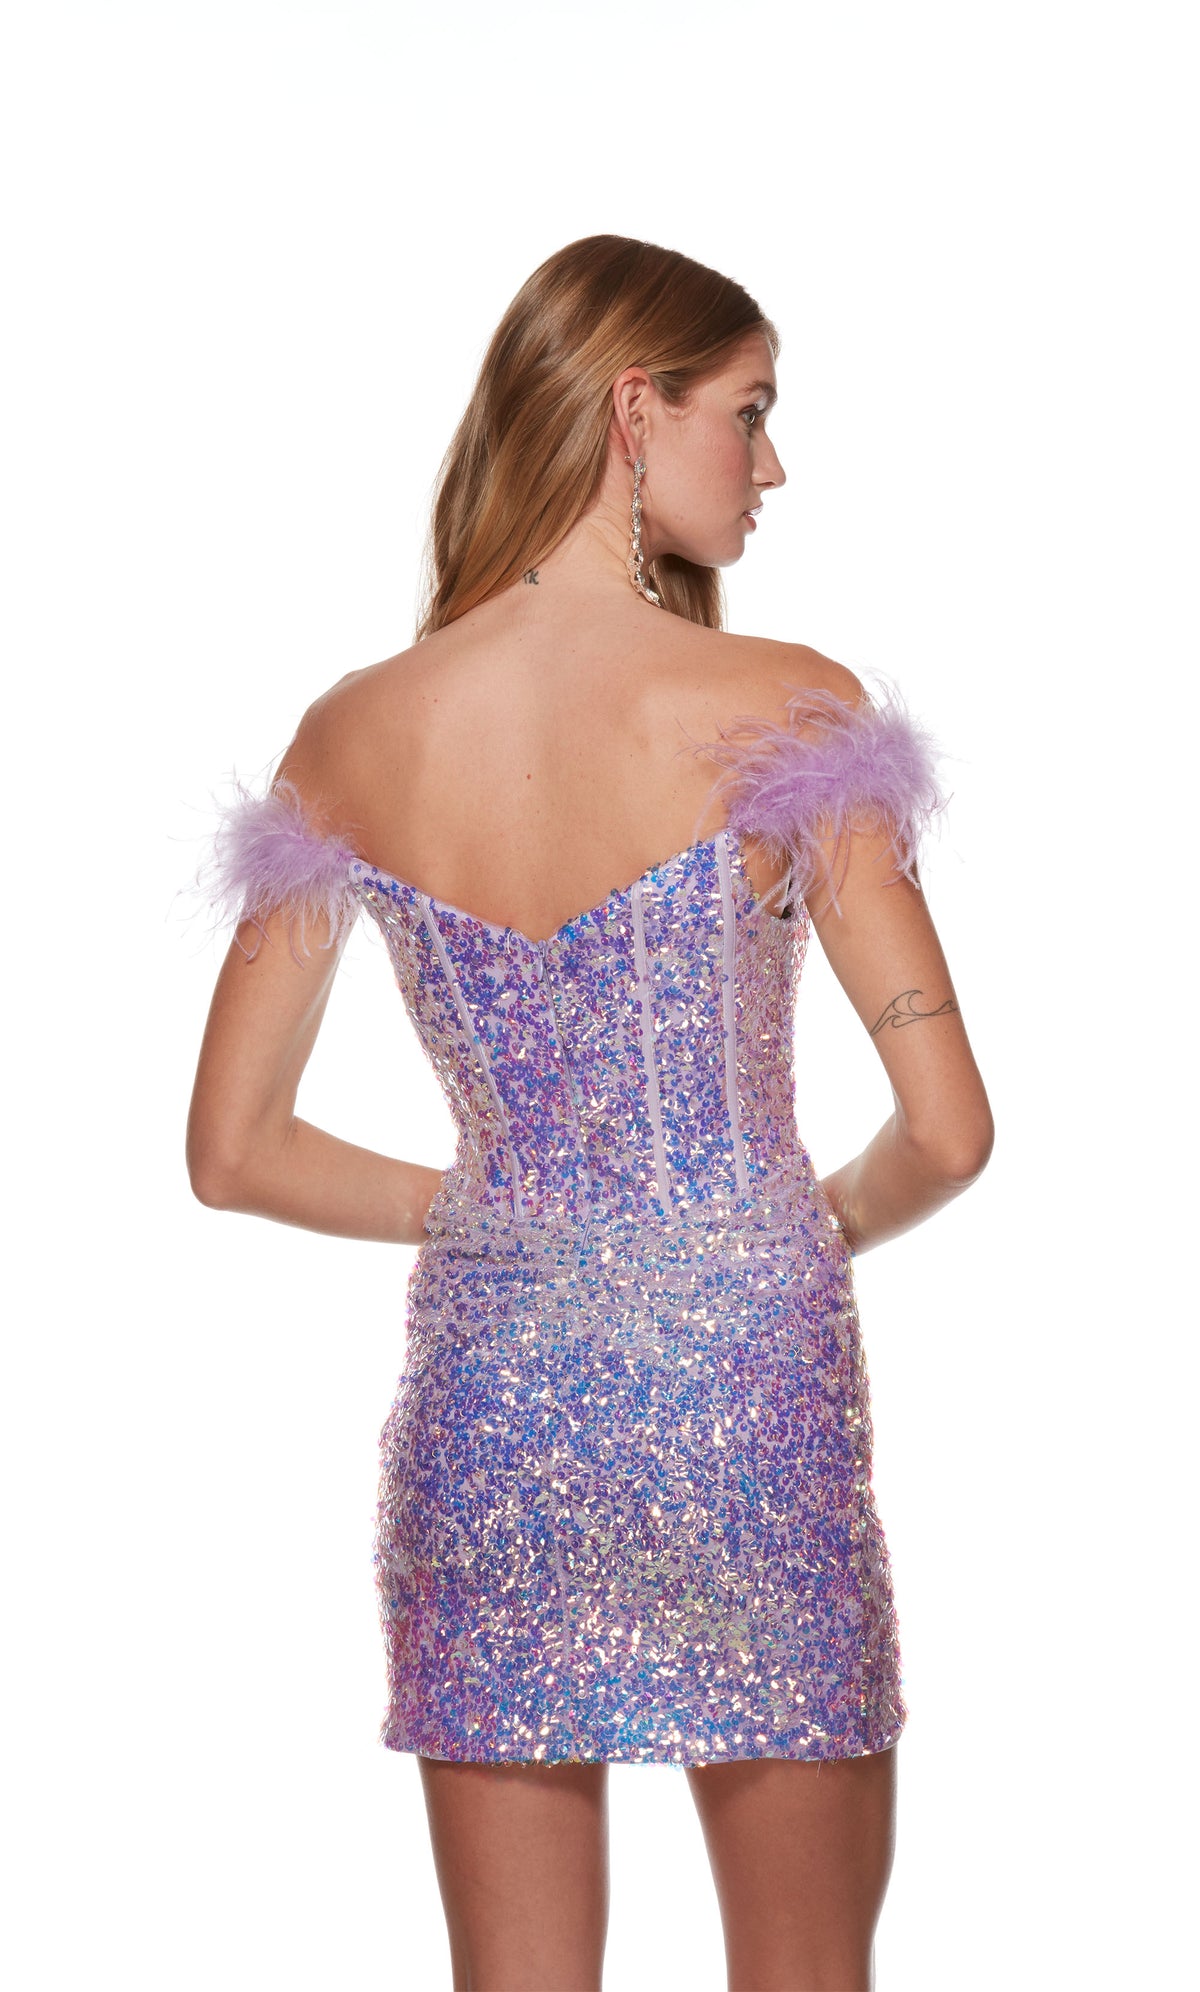 A purple, off-the-shoulder short corset dress with feather-trimmed sleeves, crafted from a sparkly iridescent seqins fabric.